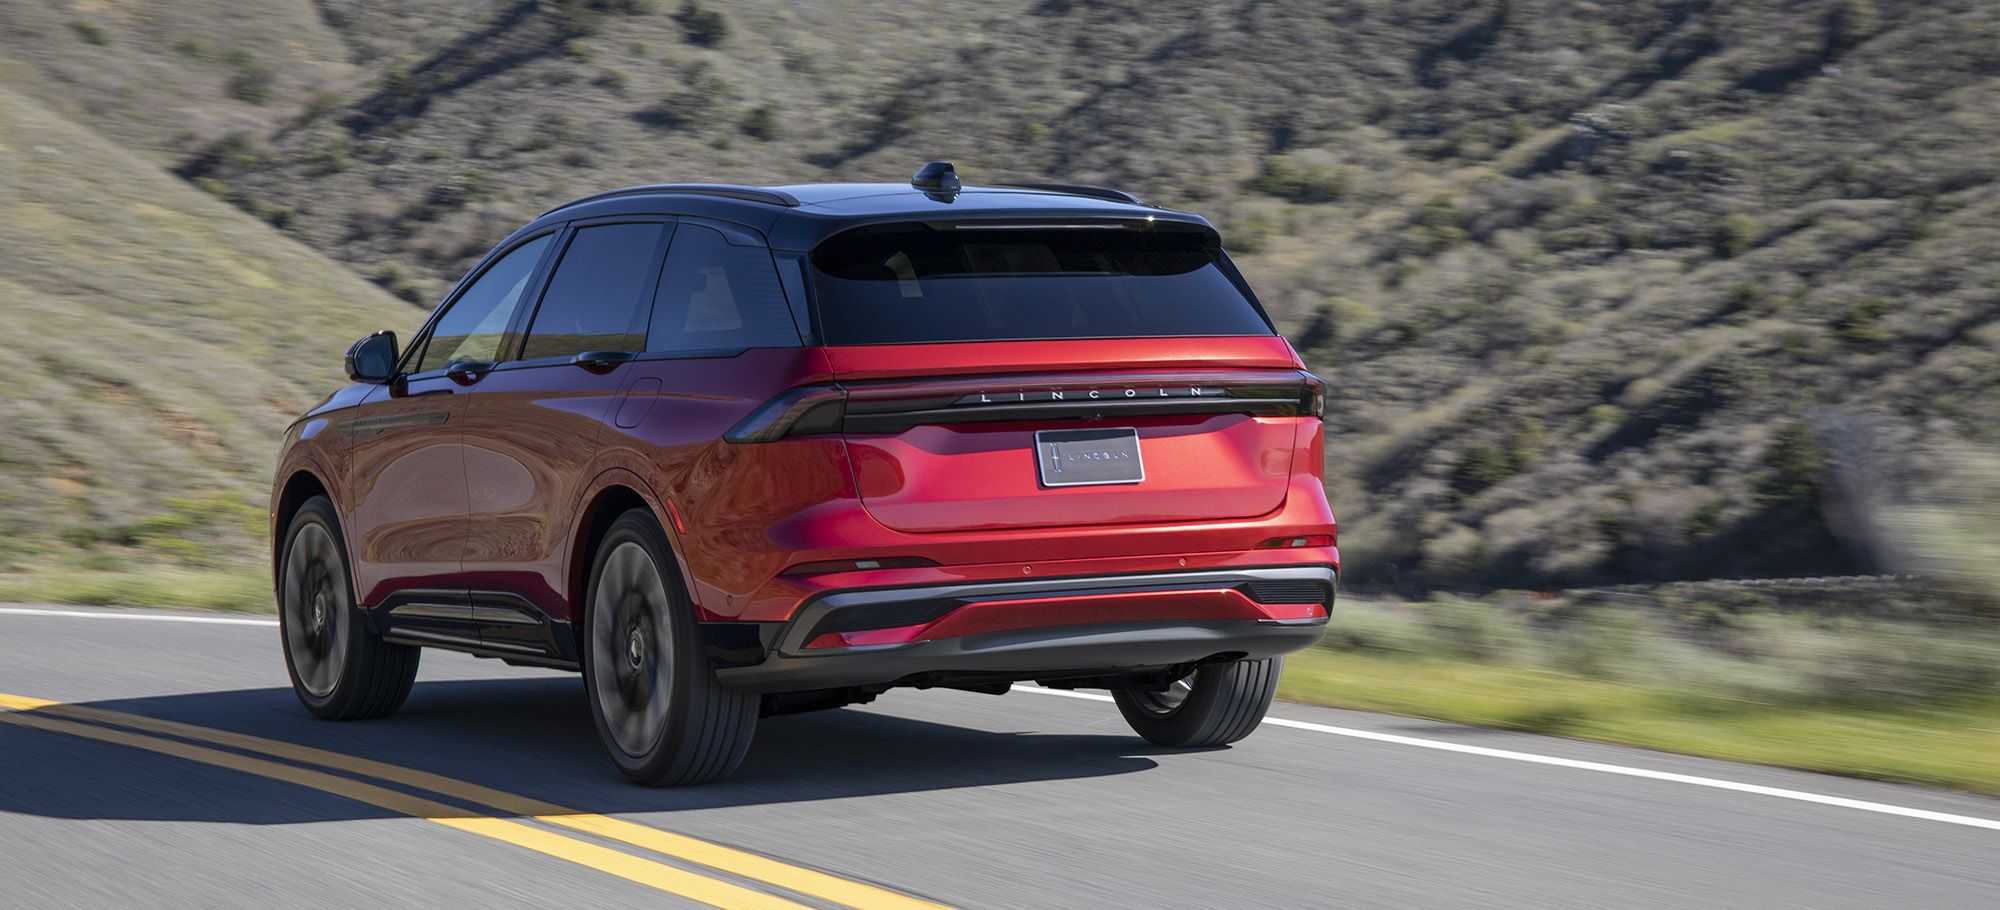 Lincoln's new SUV will be imported from China